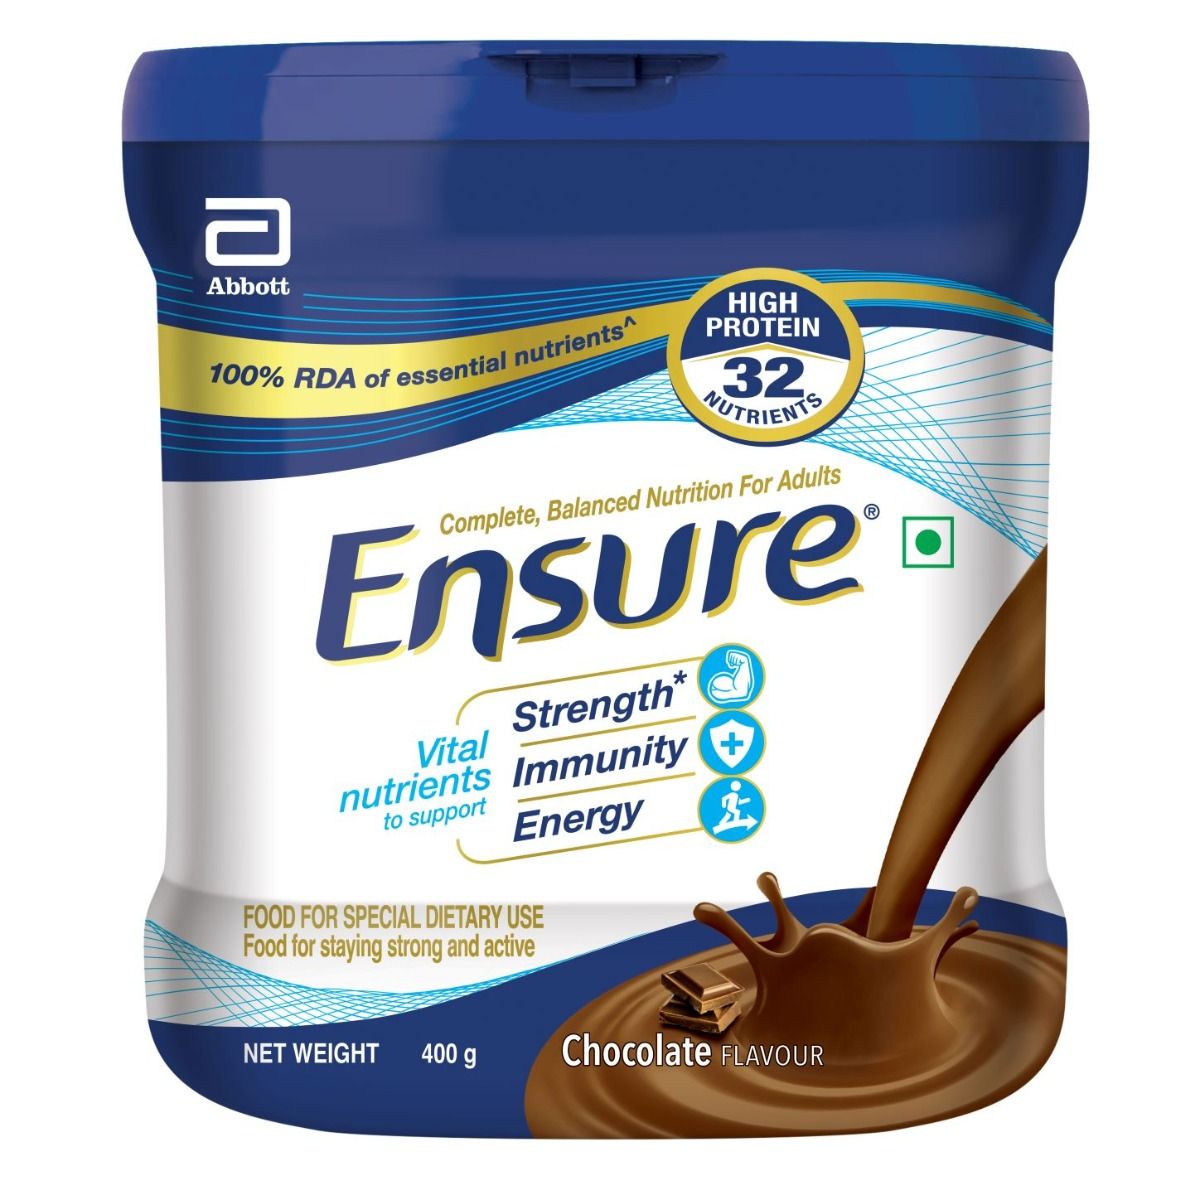 Buy Ensure Chocolate Flavoured Powder, 400 gm Refill Pack Online